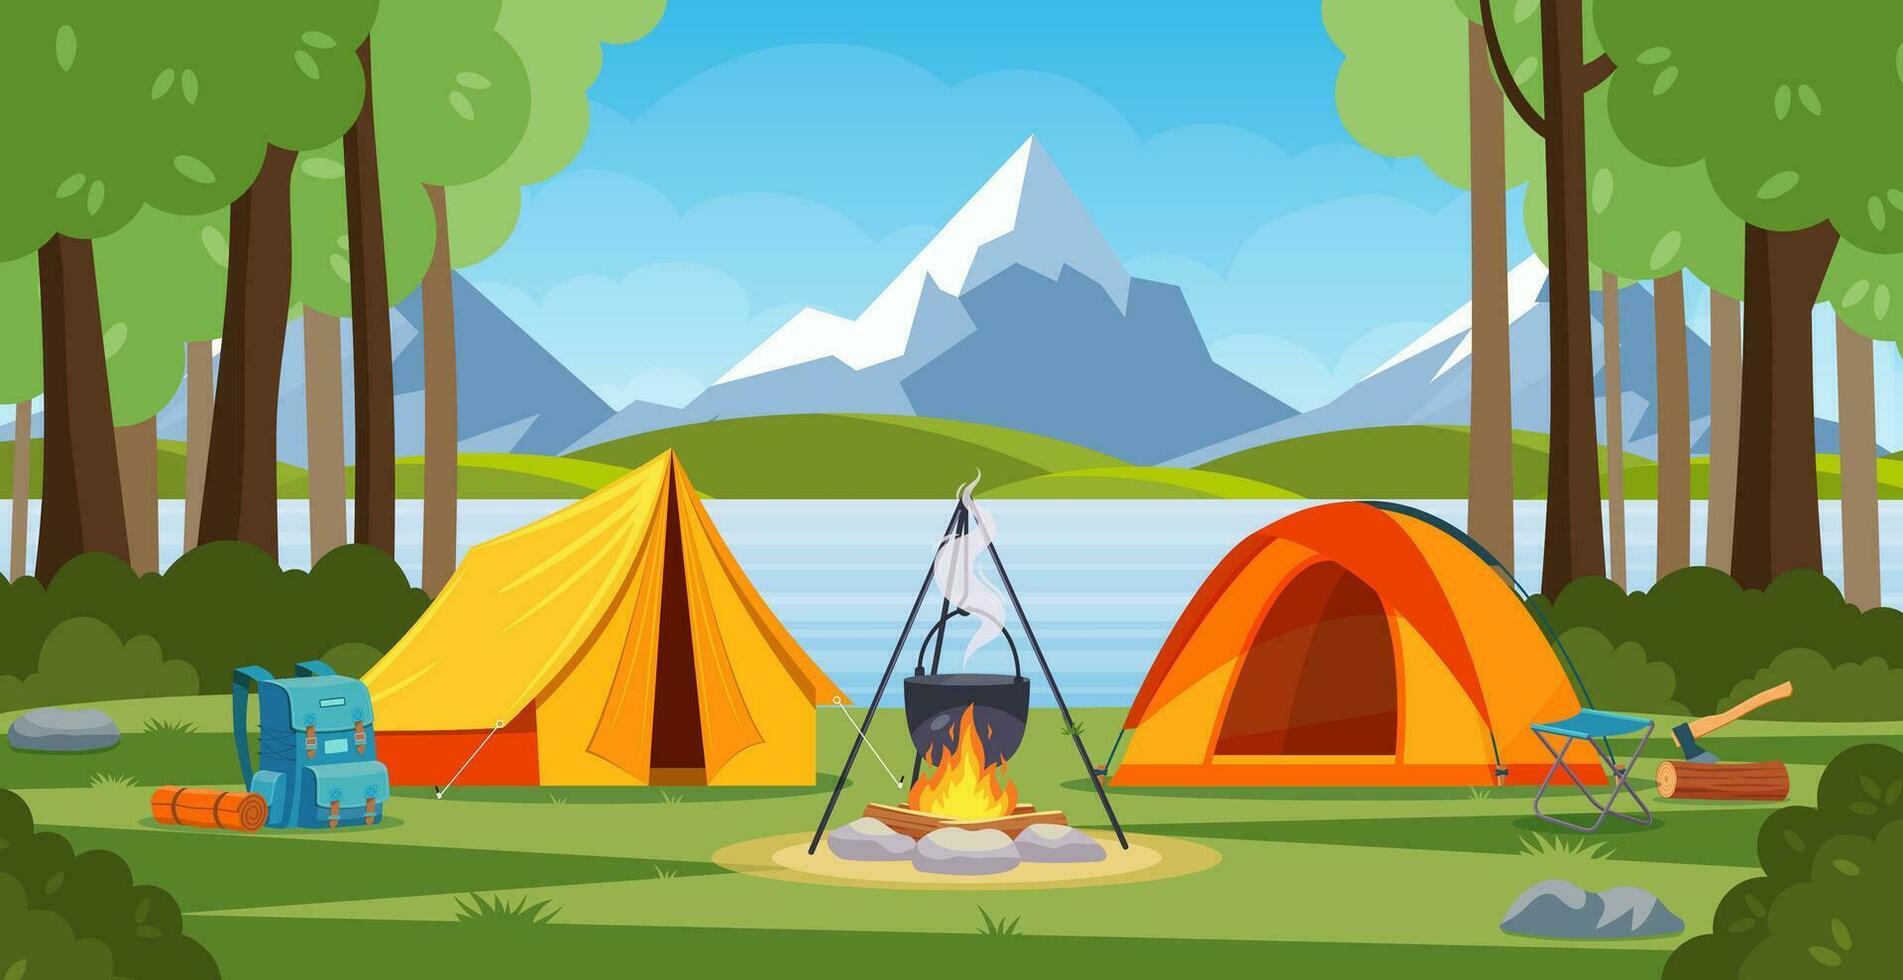 Summer camp in forest with bonfire, tent, backpack. cartoon landscape with mountain, forest and campsite. Equipment for travel, hiking. Vector illustration in flat style